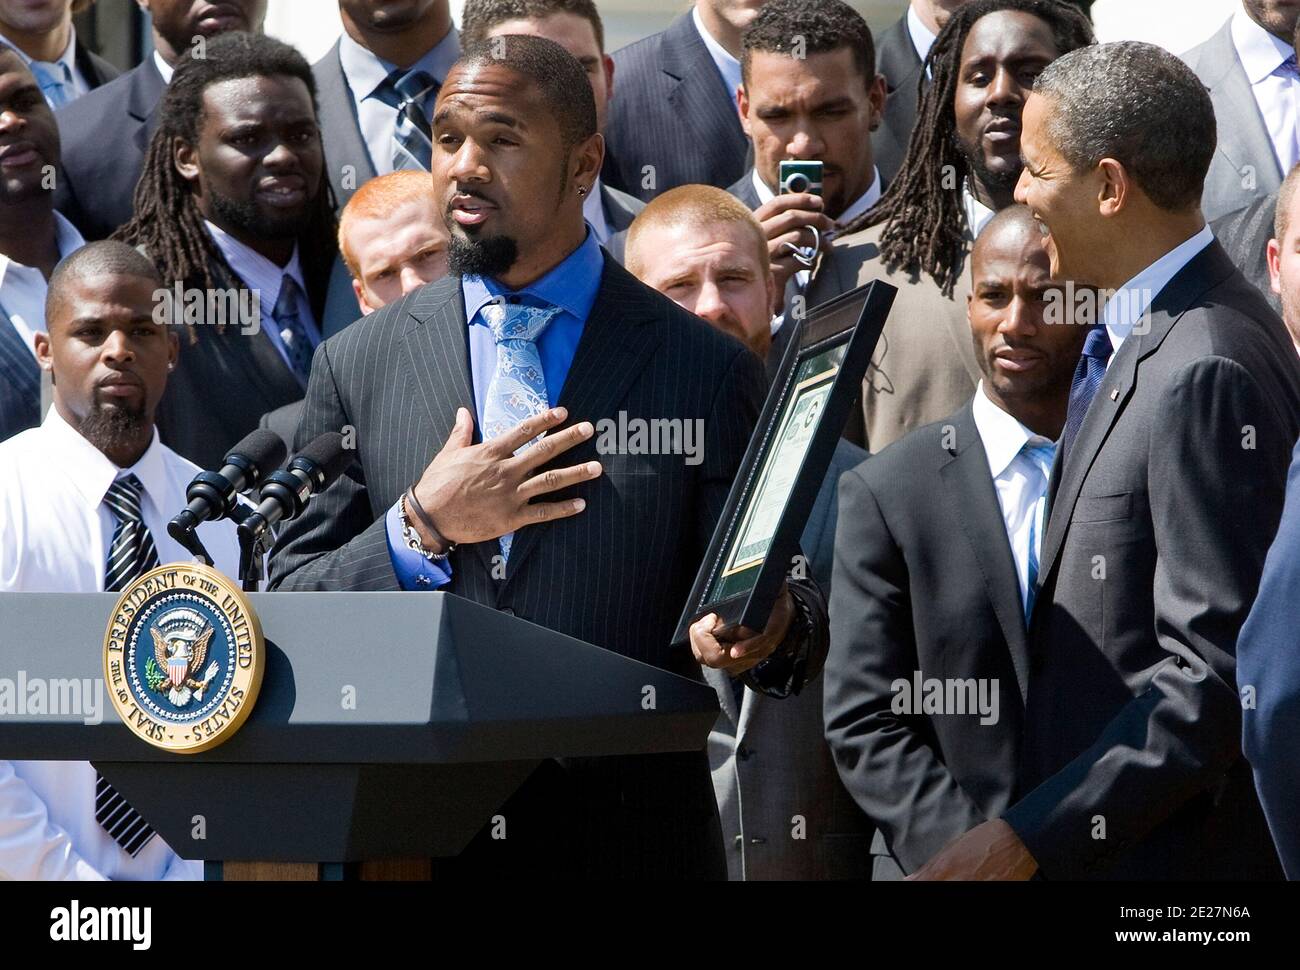 Green Bay Packers Player Charles Woodson presents an ownership share to President Barack Obama during an event to honor the Super Bowl XLV champions at the White House in Washington on August 12, 2011. The Packers are the only publicly owned NFL team in the United States. Photo by Kristoffer Tripplaar/Pool/ABACAPRESS.COM Stock Photo